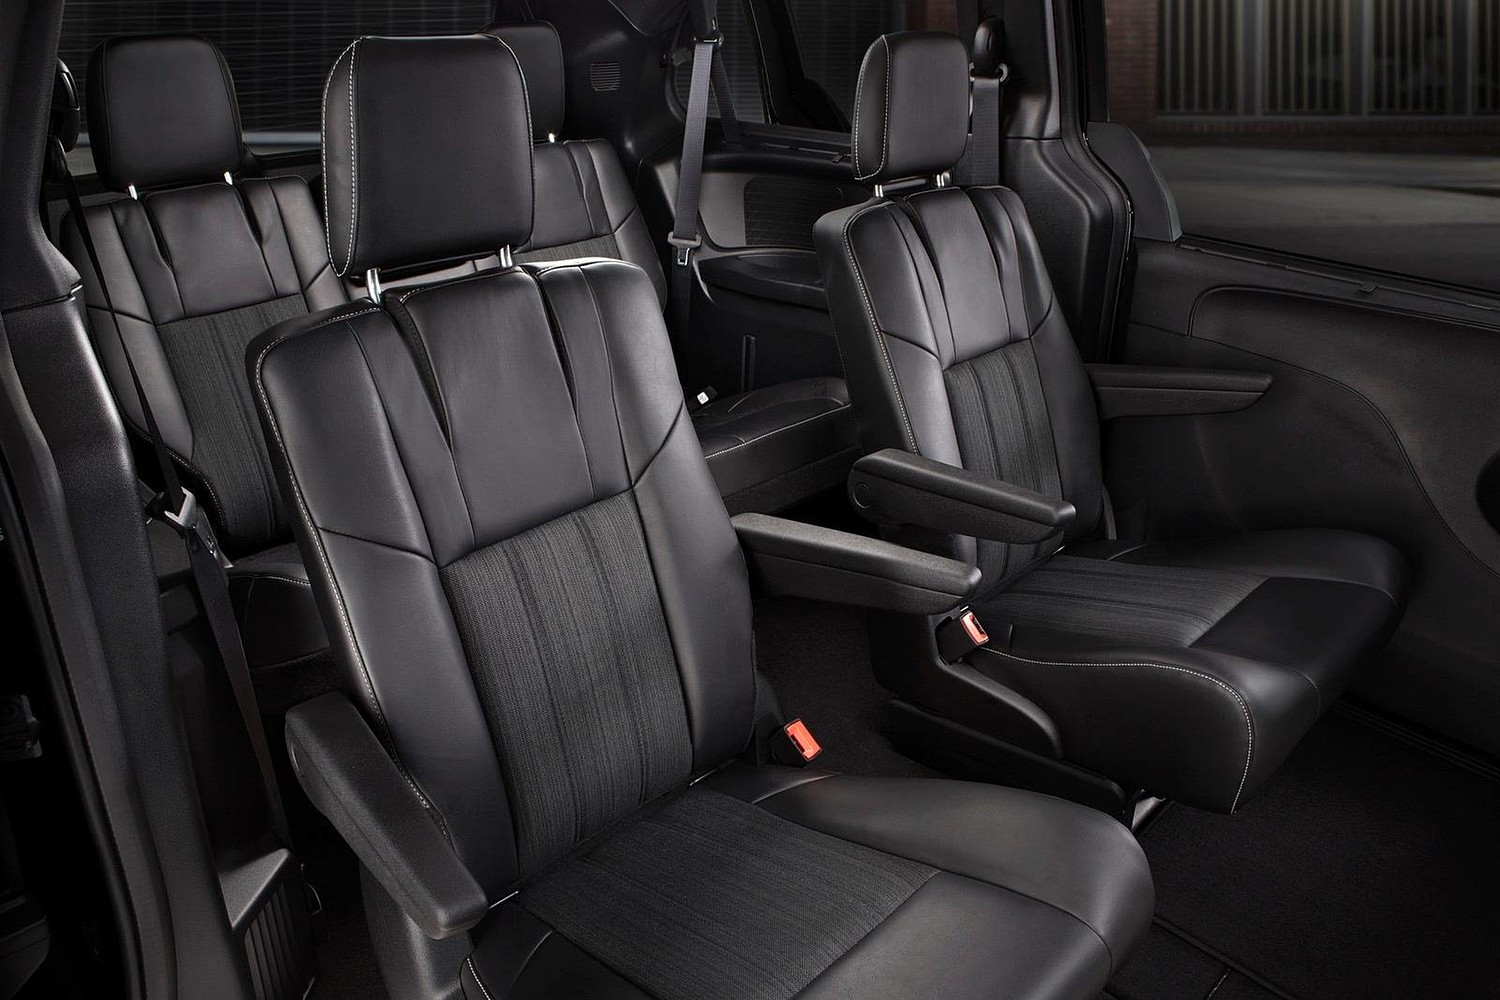 Chrysler Town and Country S Passenger Minivan Rear Interior (2013 model year shown)